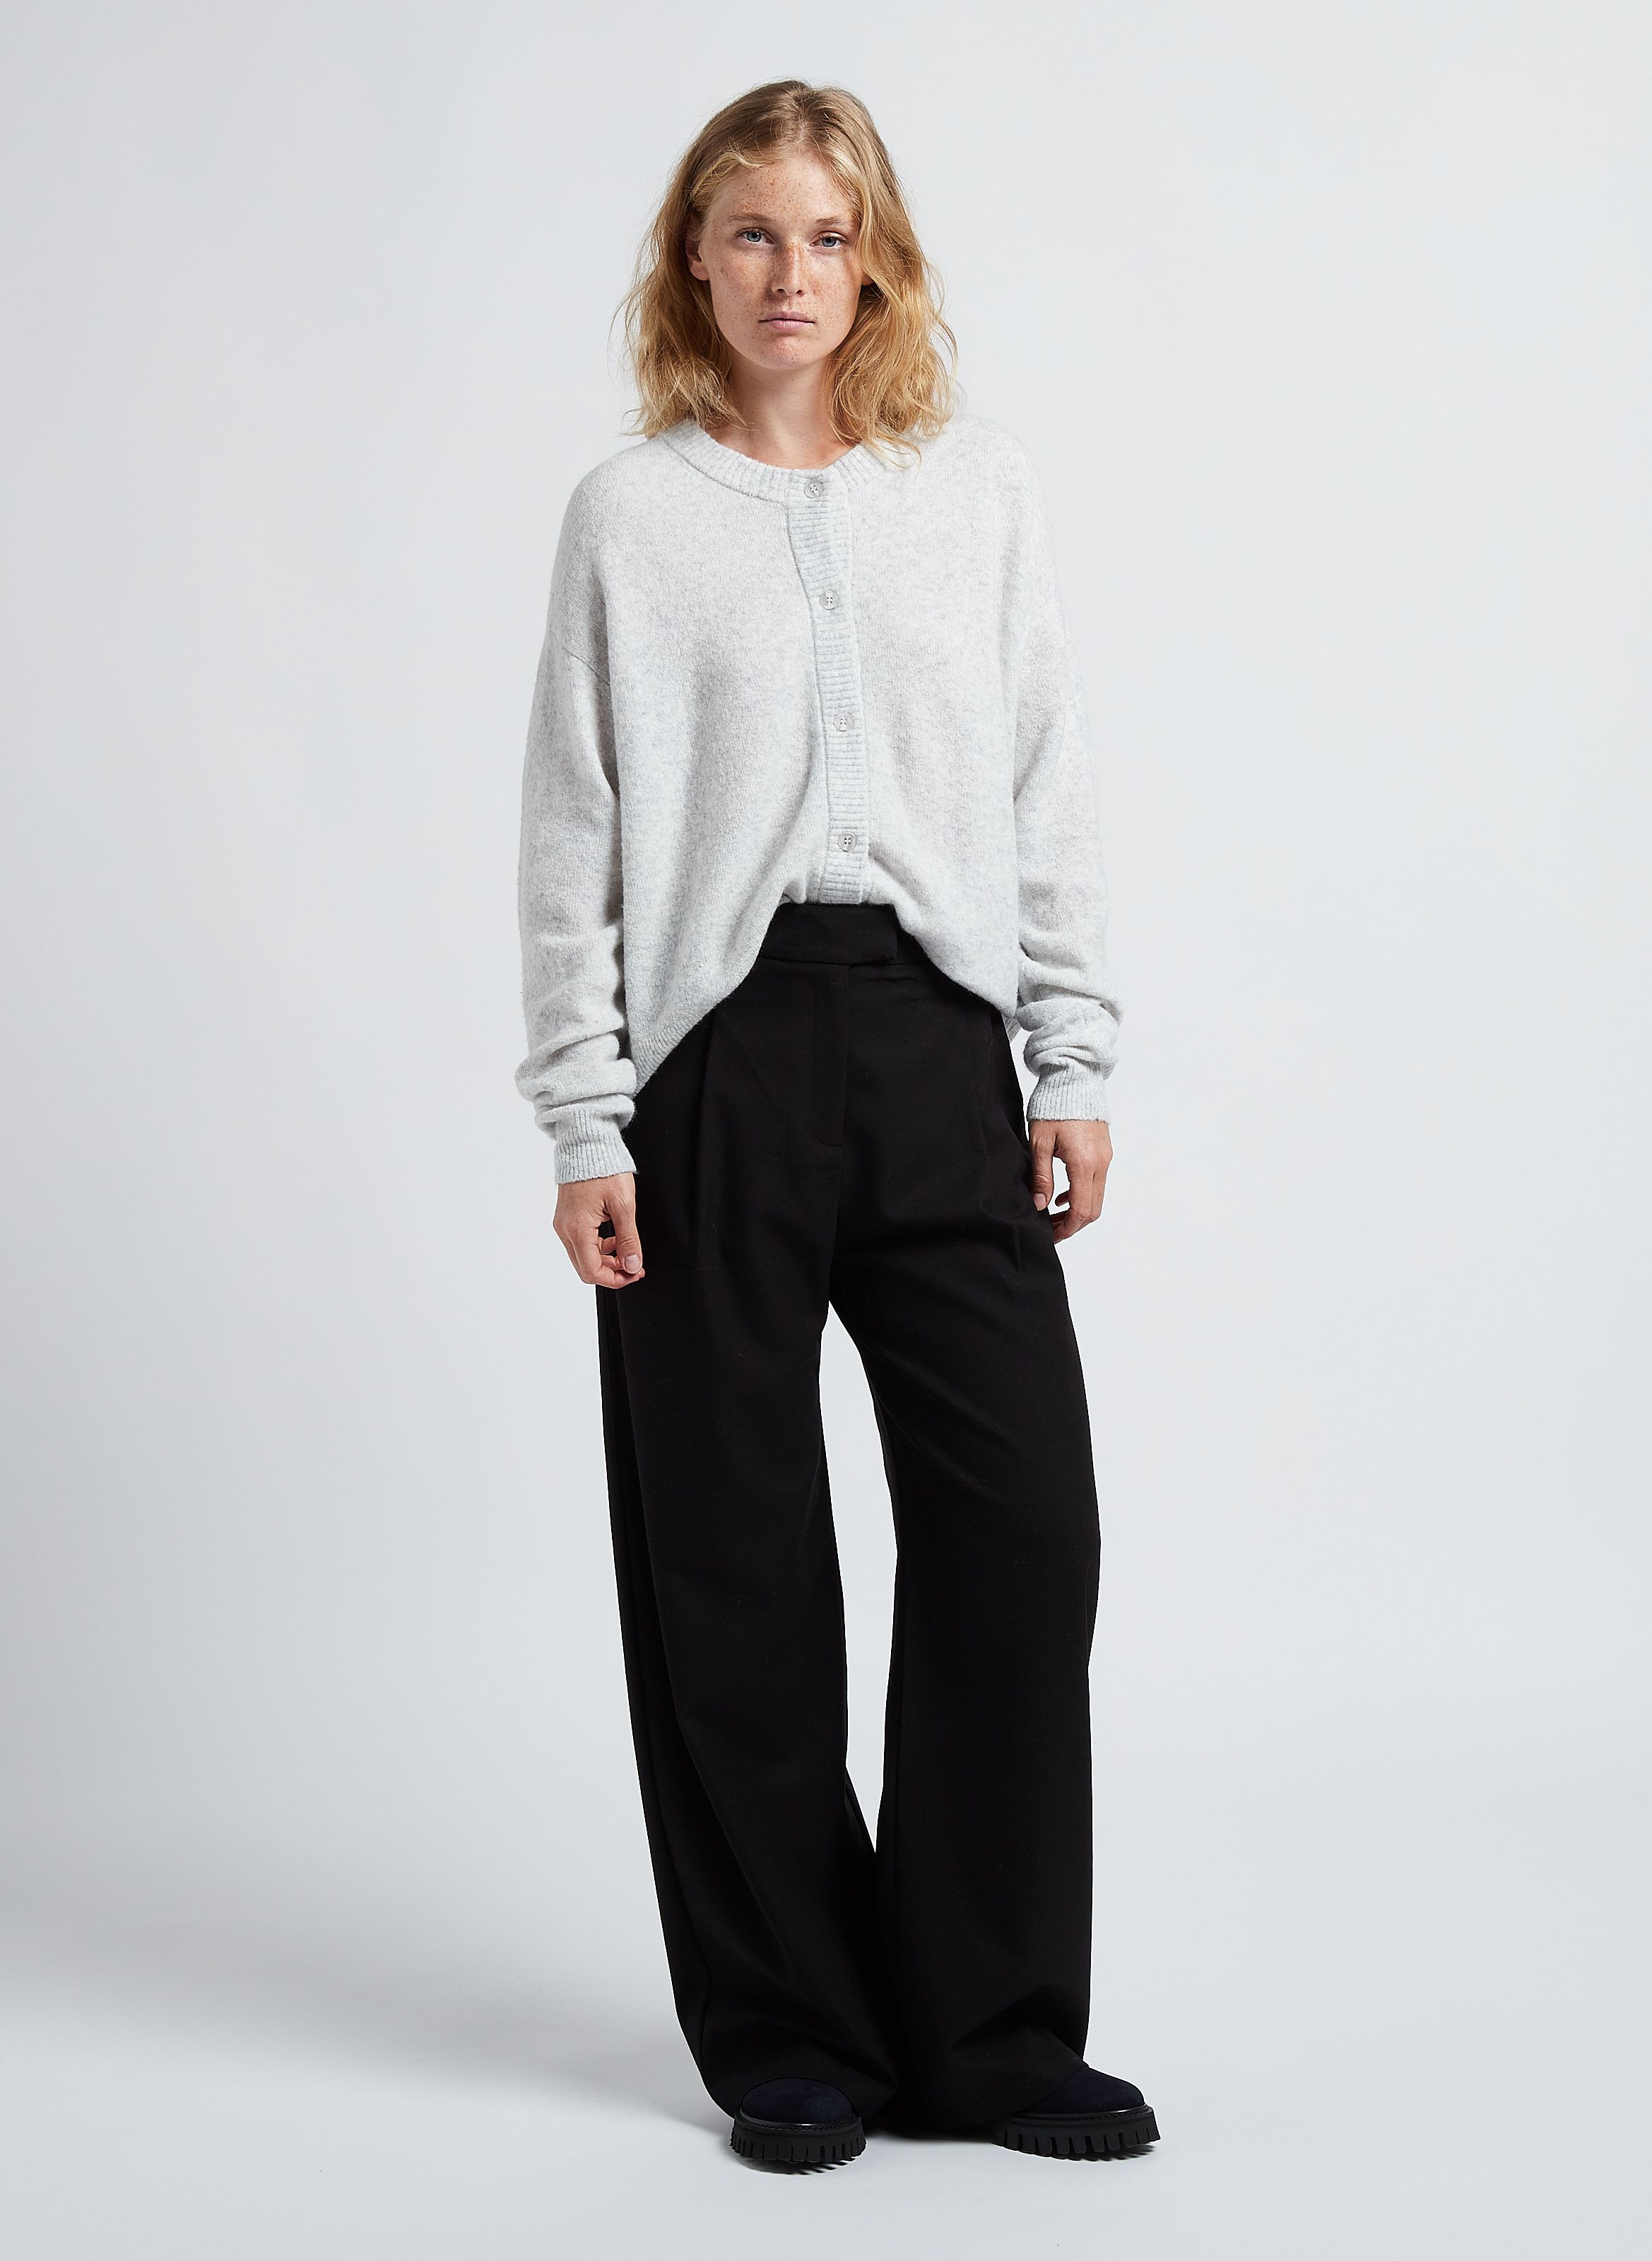 ZARA Man TROUSERS | CROPPED PLEATED TROUSERS Camel | 8727/408 ⋆ Divanidosa